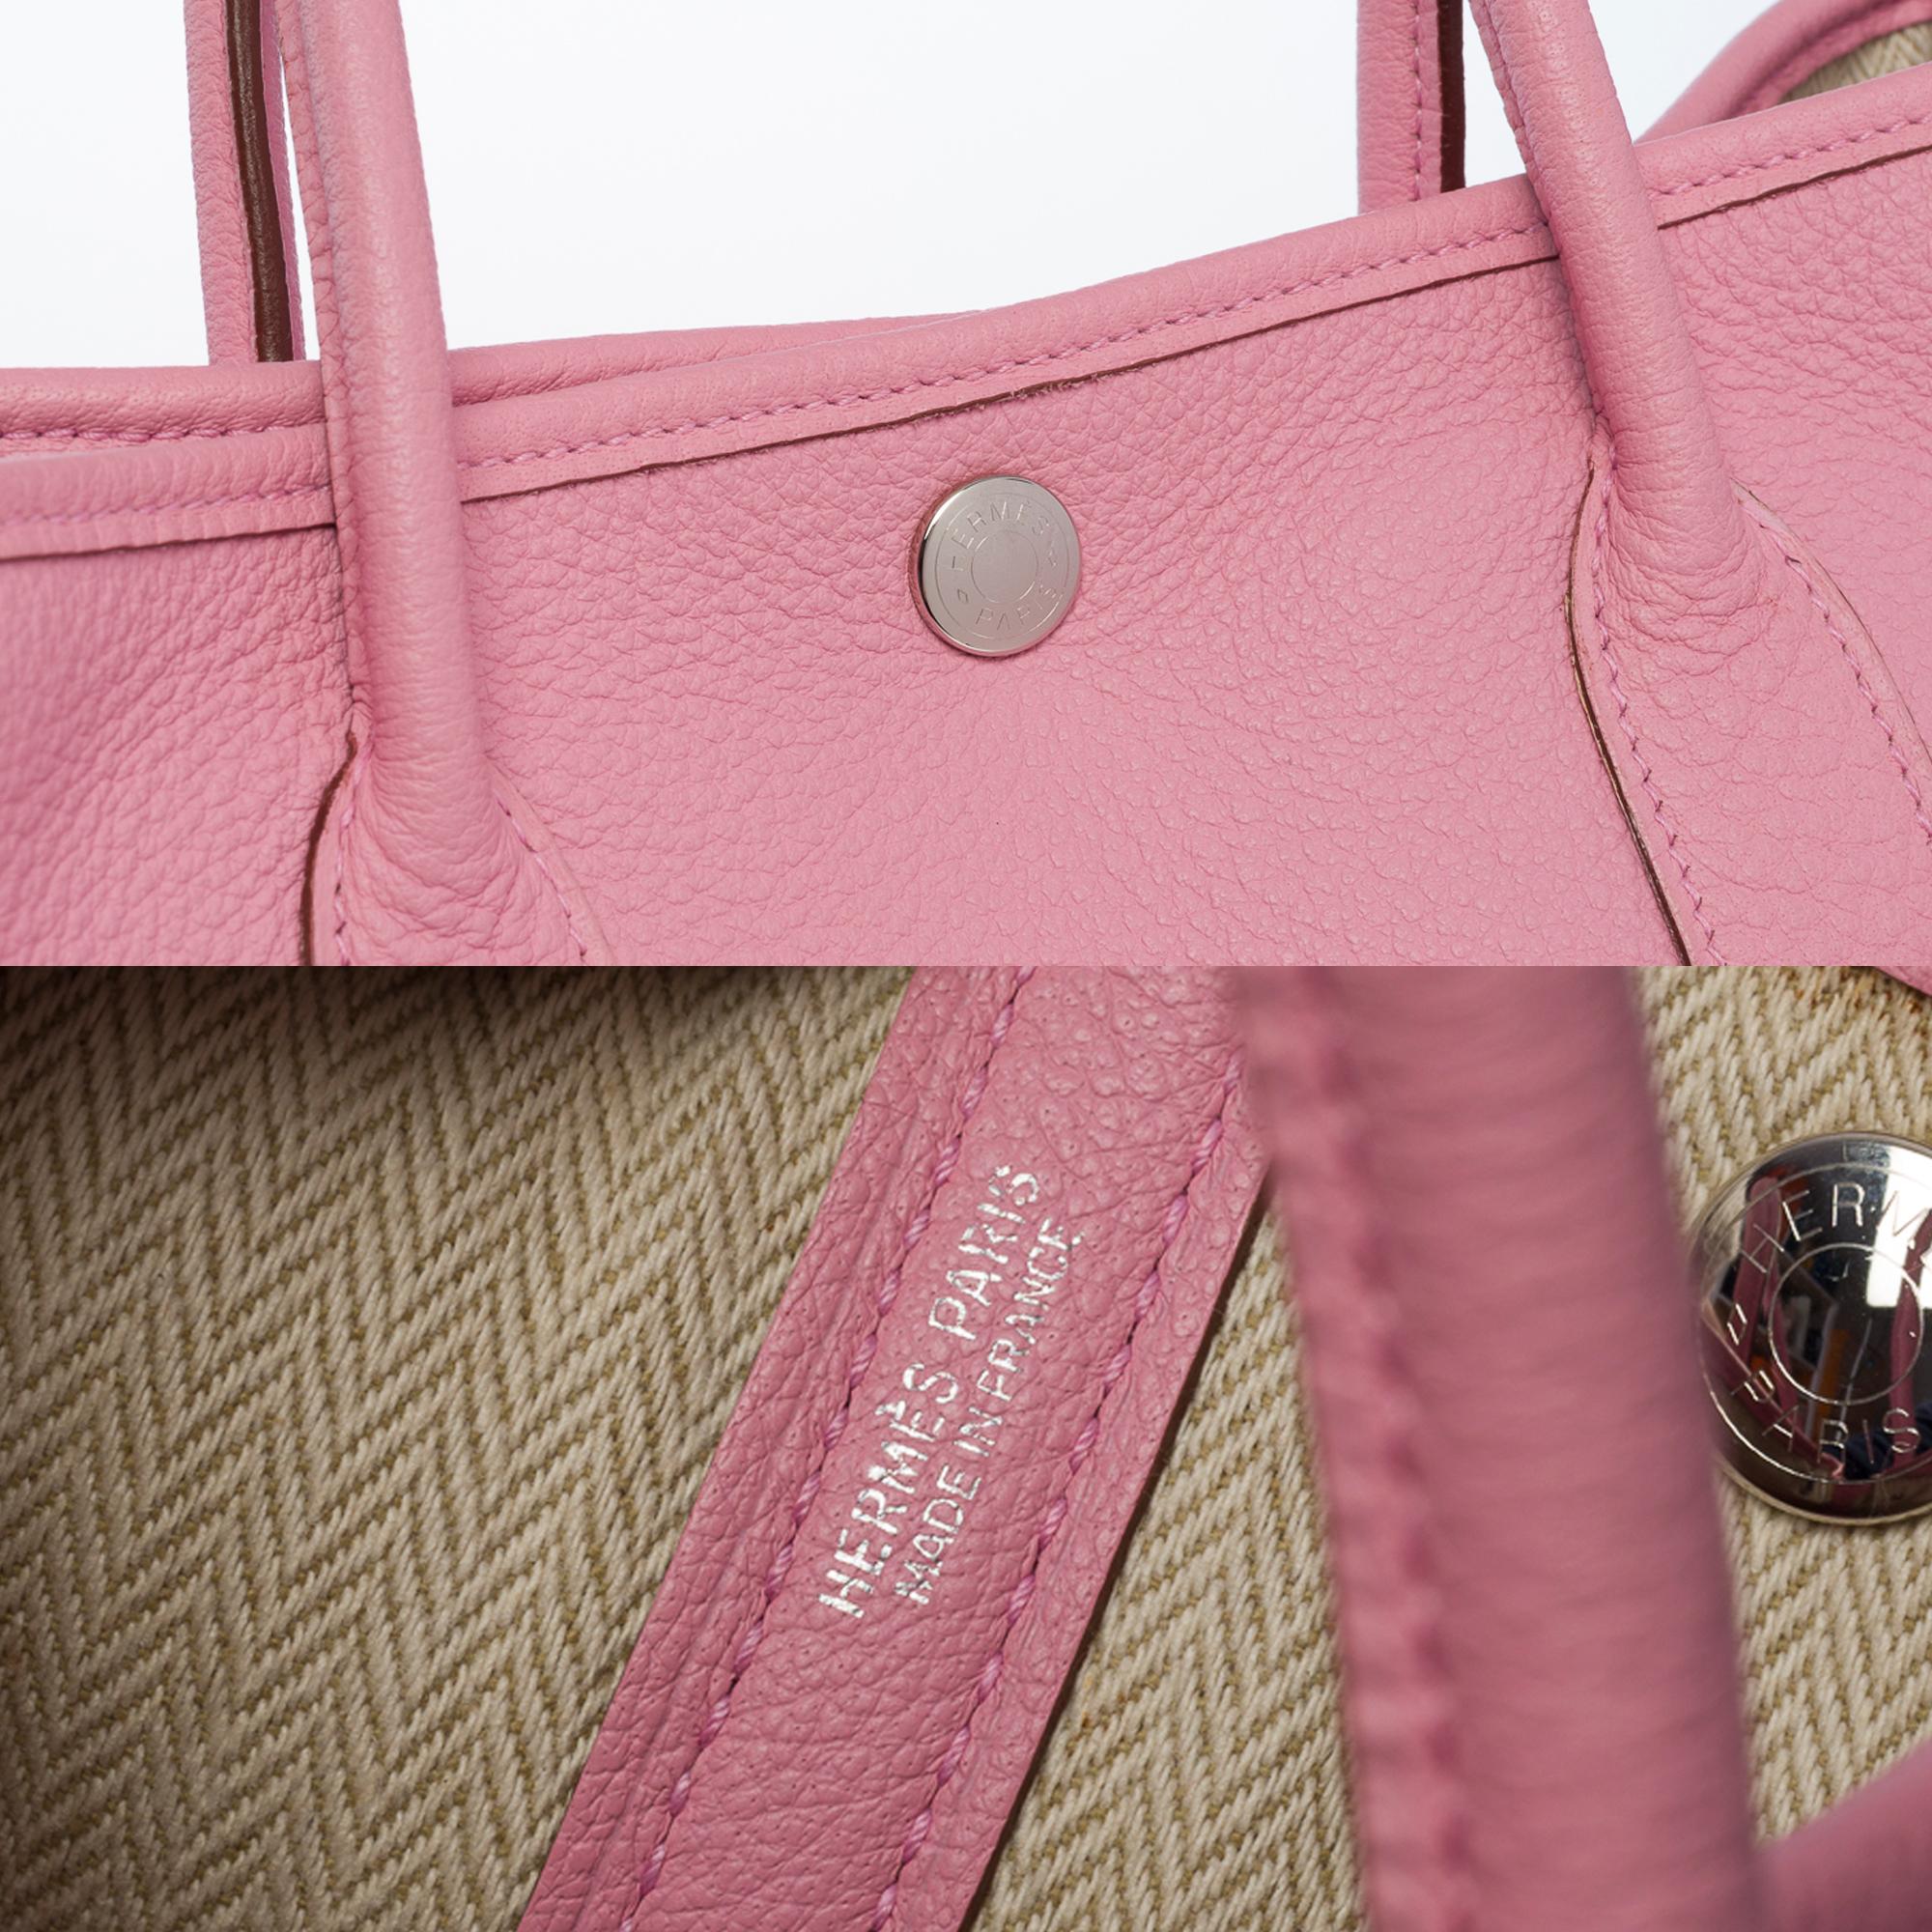 Gorgeous Hermès Garden Party TPM Tote bag in Sakura Pink Negonda leather, SHW In Excellent Condition For Sale In Paris, IDF